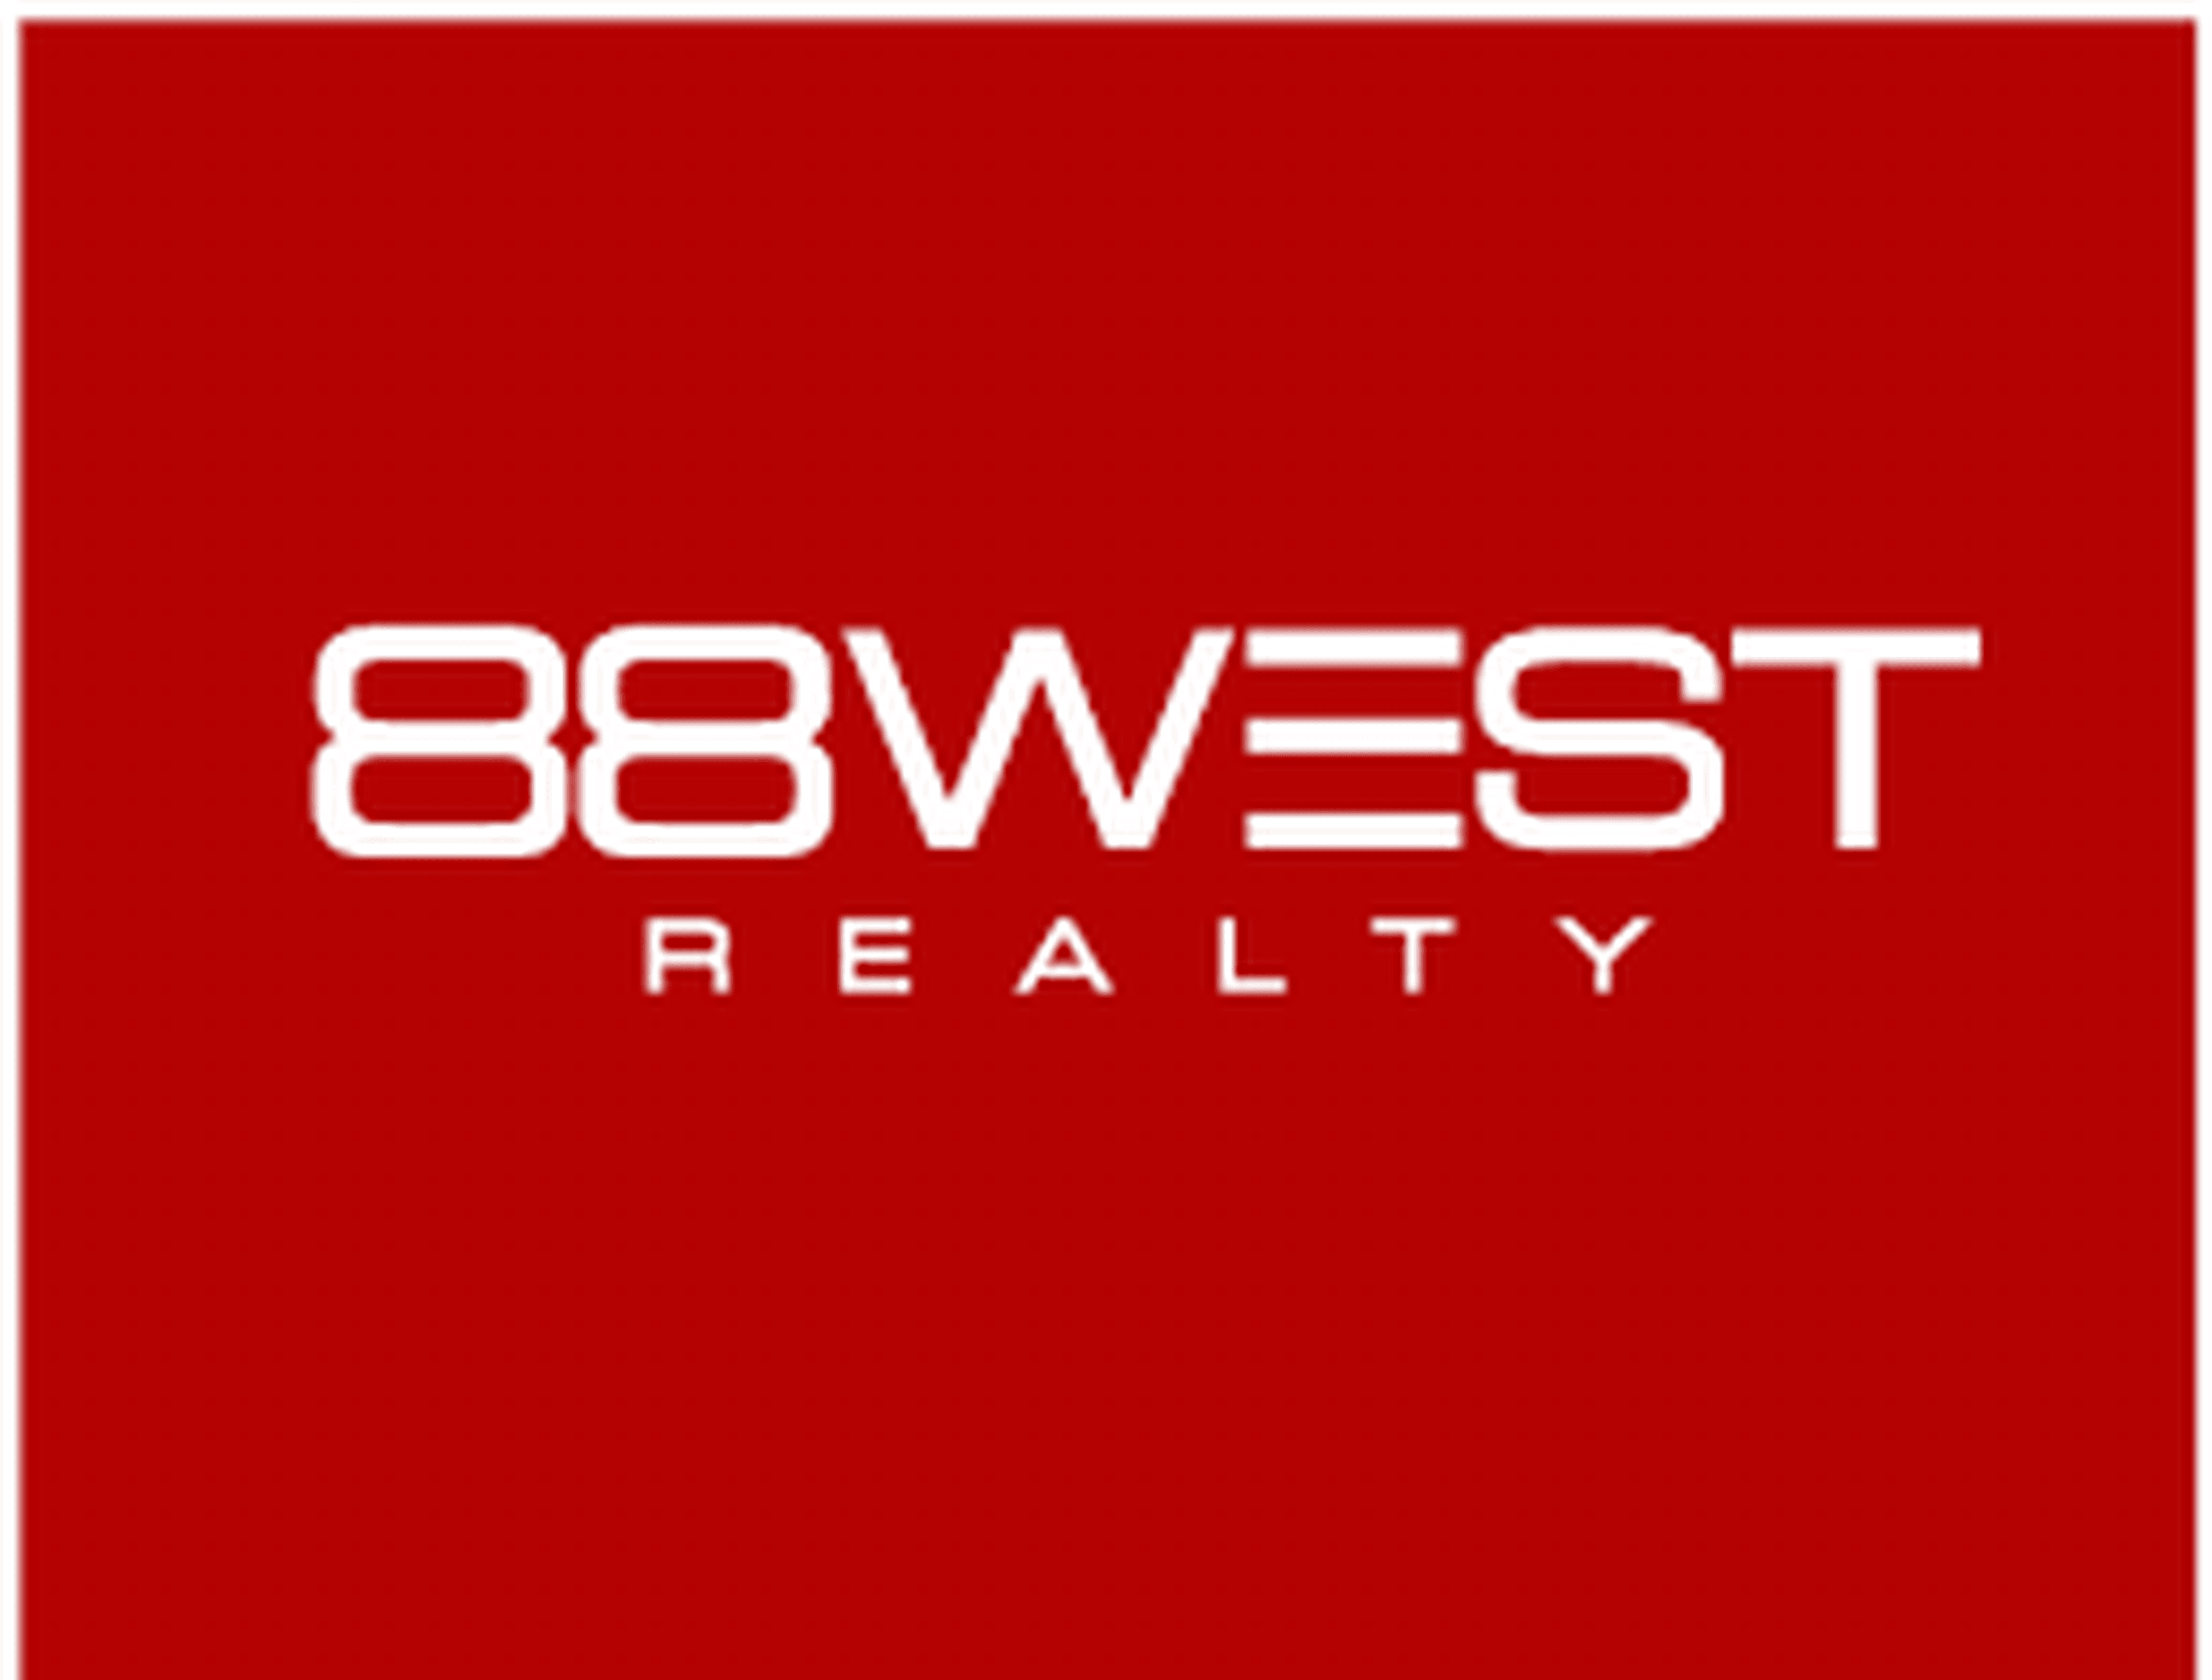 88 West Realty Logo